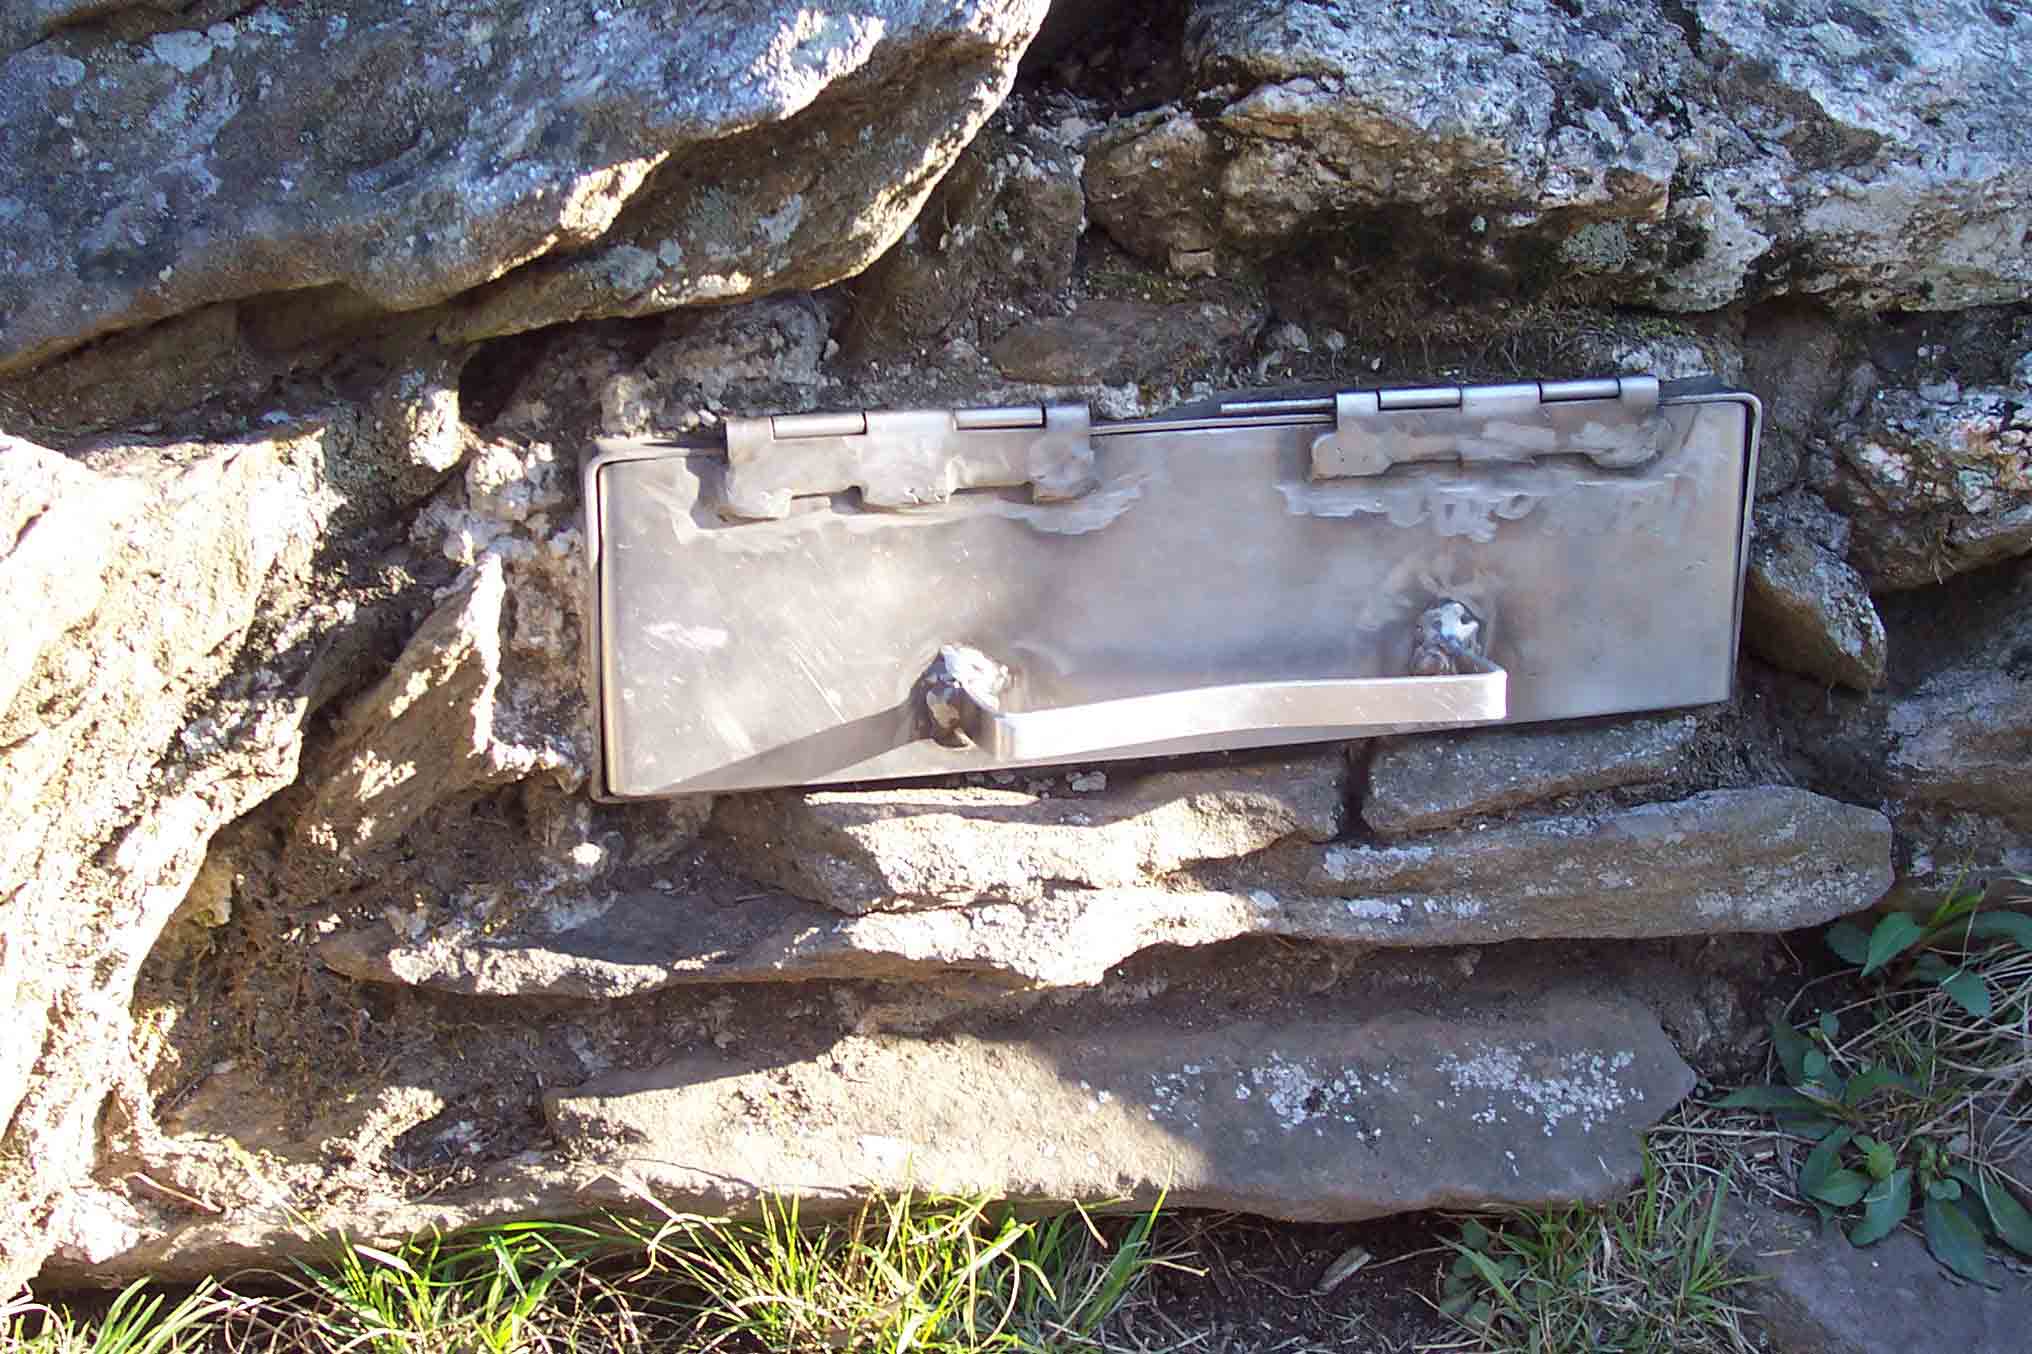 mm 8.6 This is a slot built into the rock commemorating the southern end of the AT. The trail log is kept inside.  Courtesy wbmcp@hotmail.com